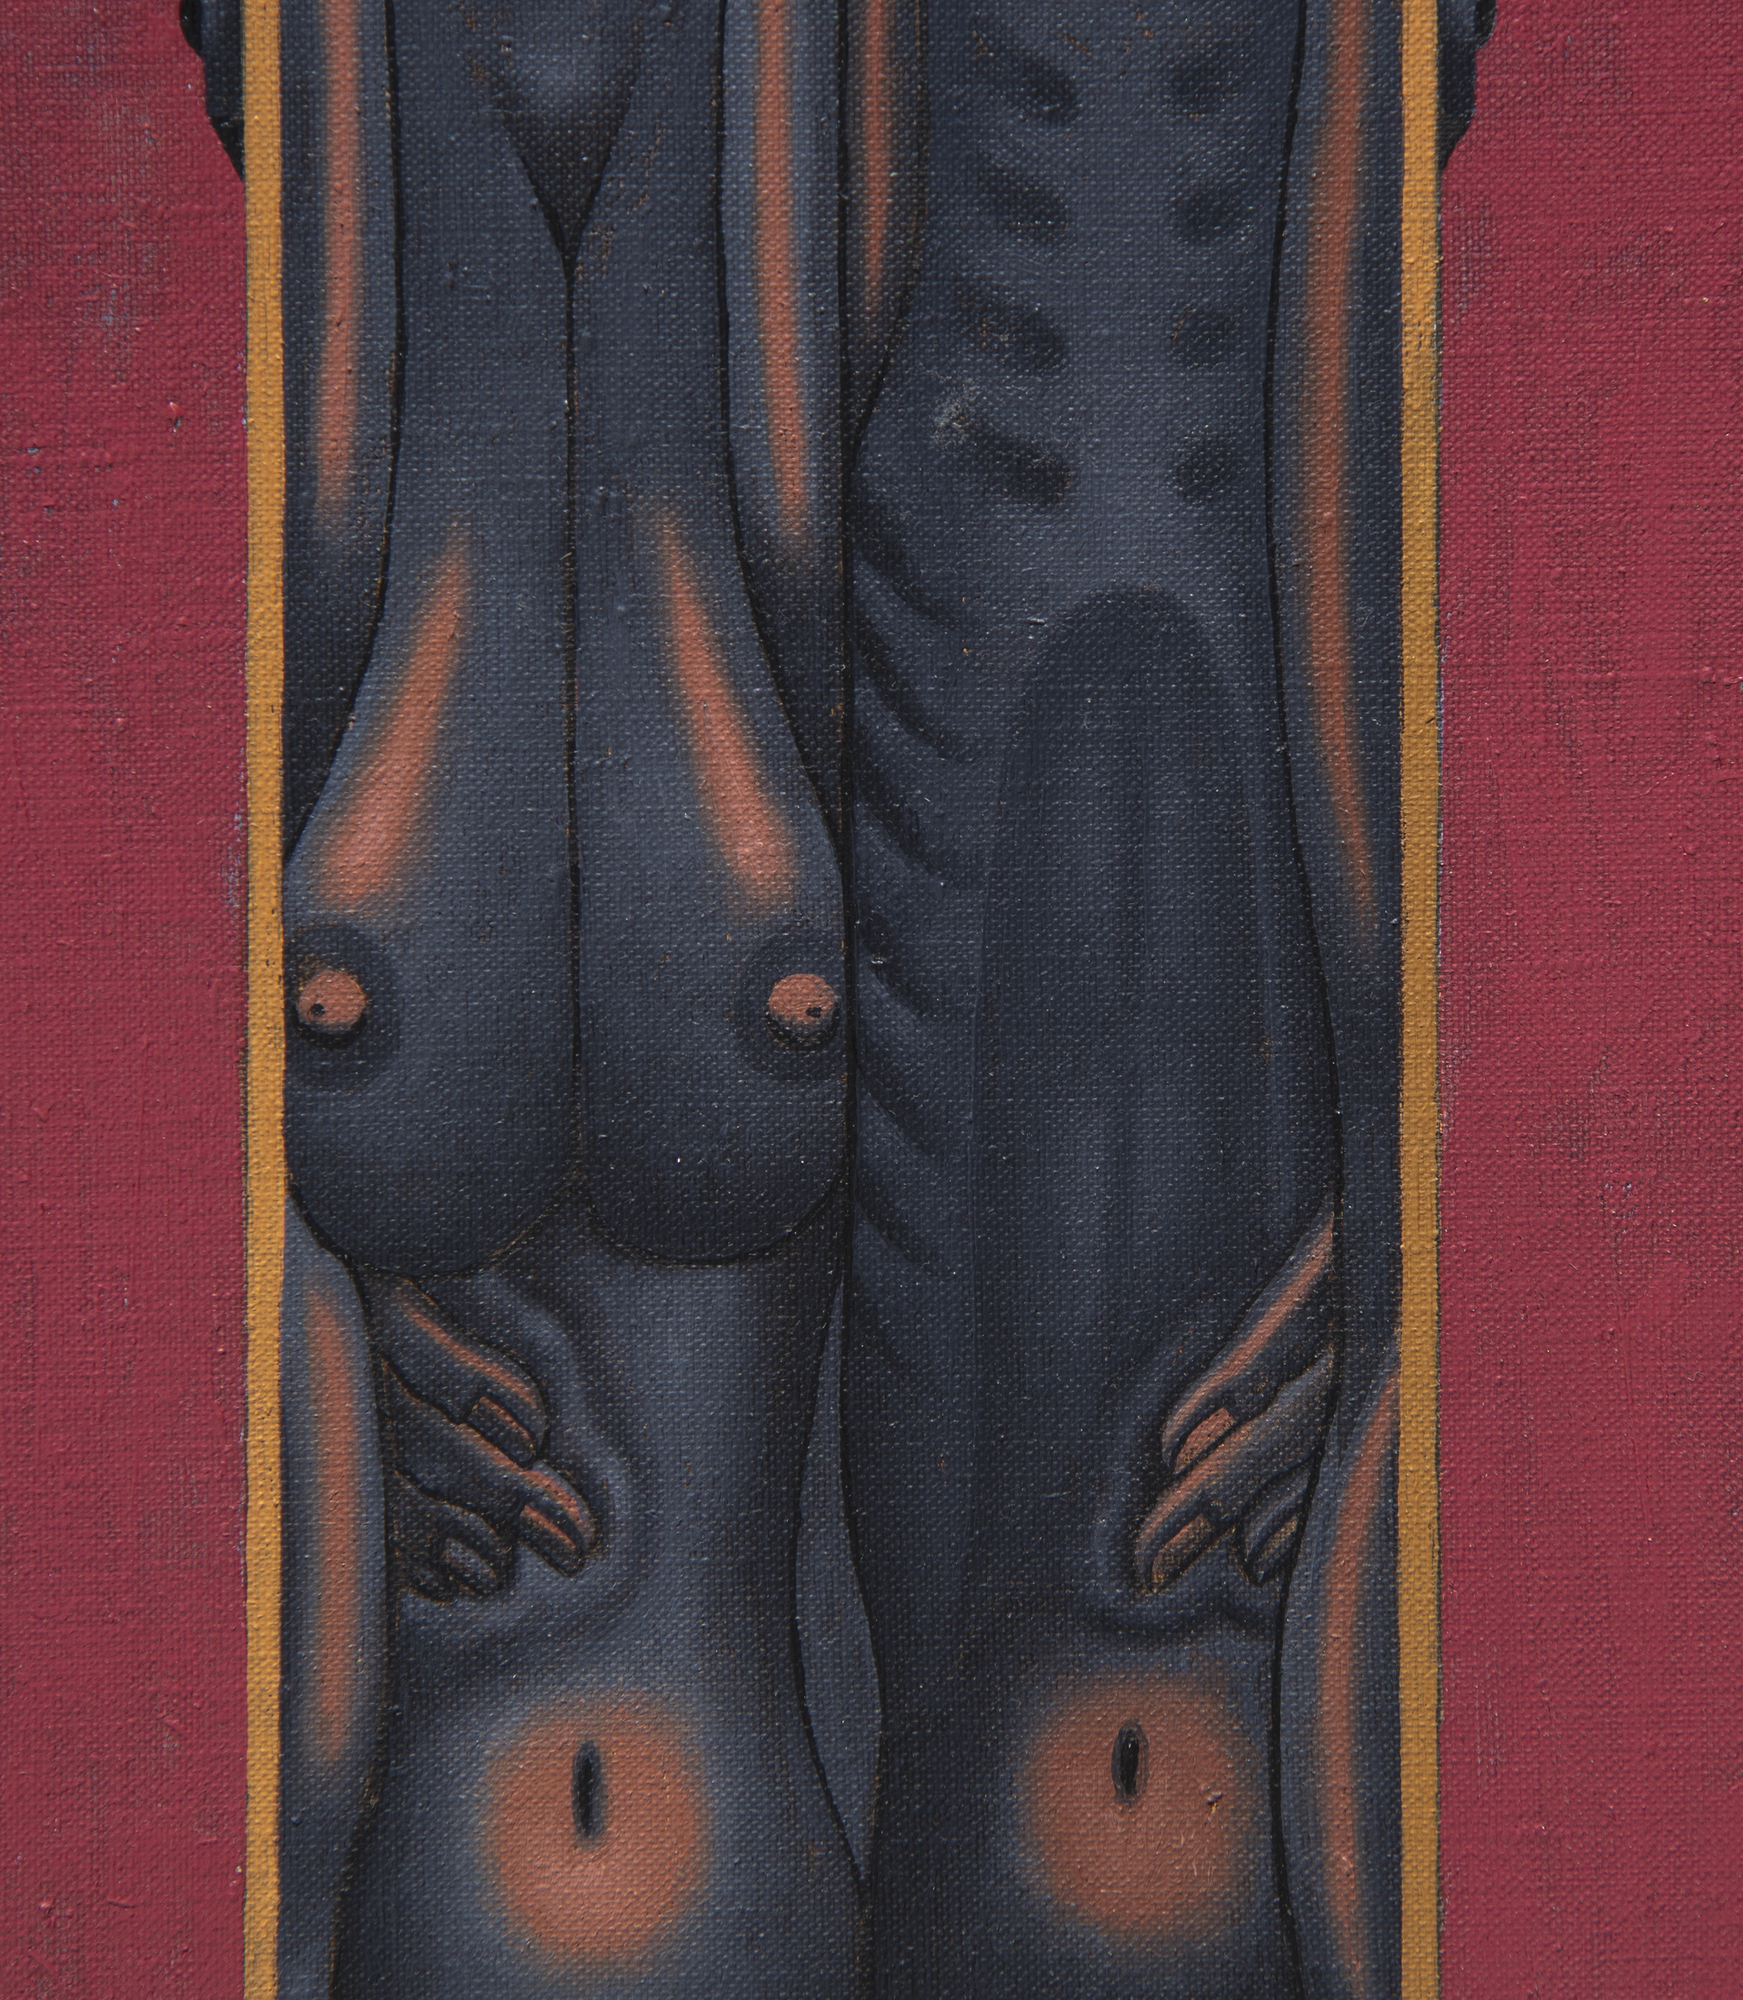 IRVING NORMAN - Totems - Öl auf Leinwand - 72 x 110 in.